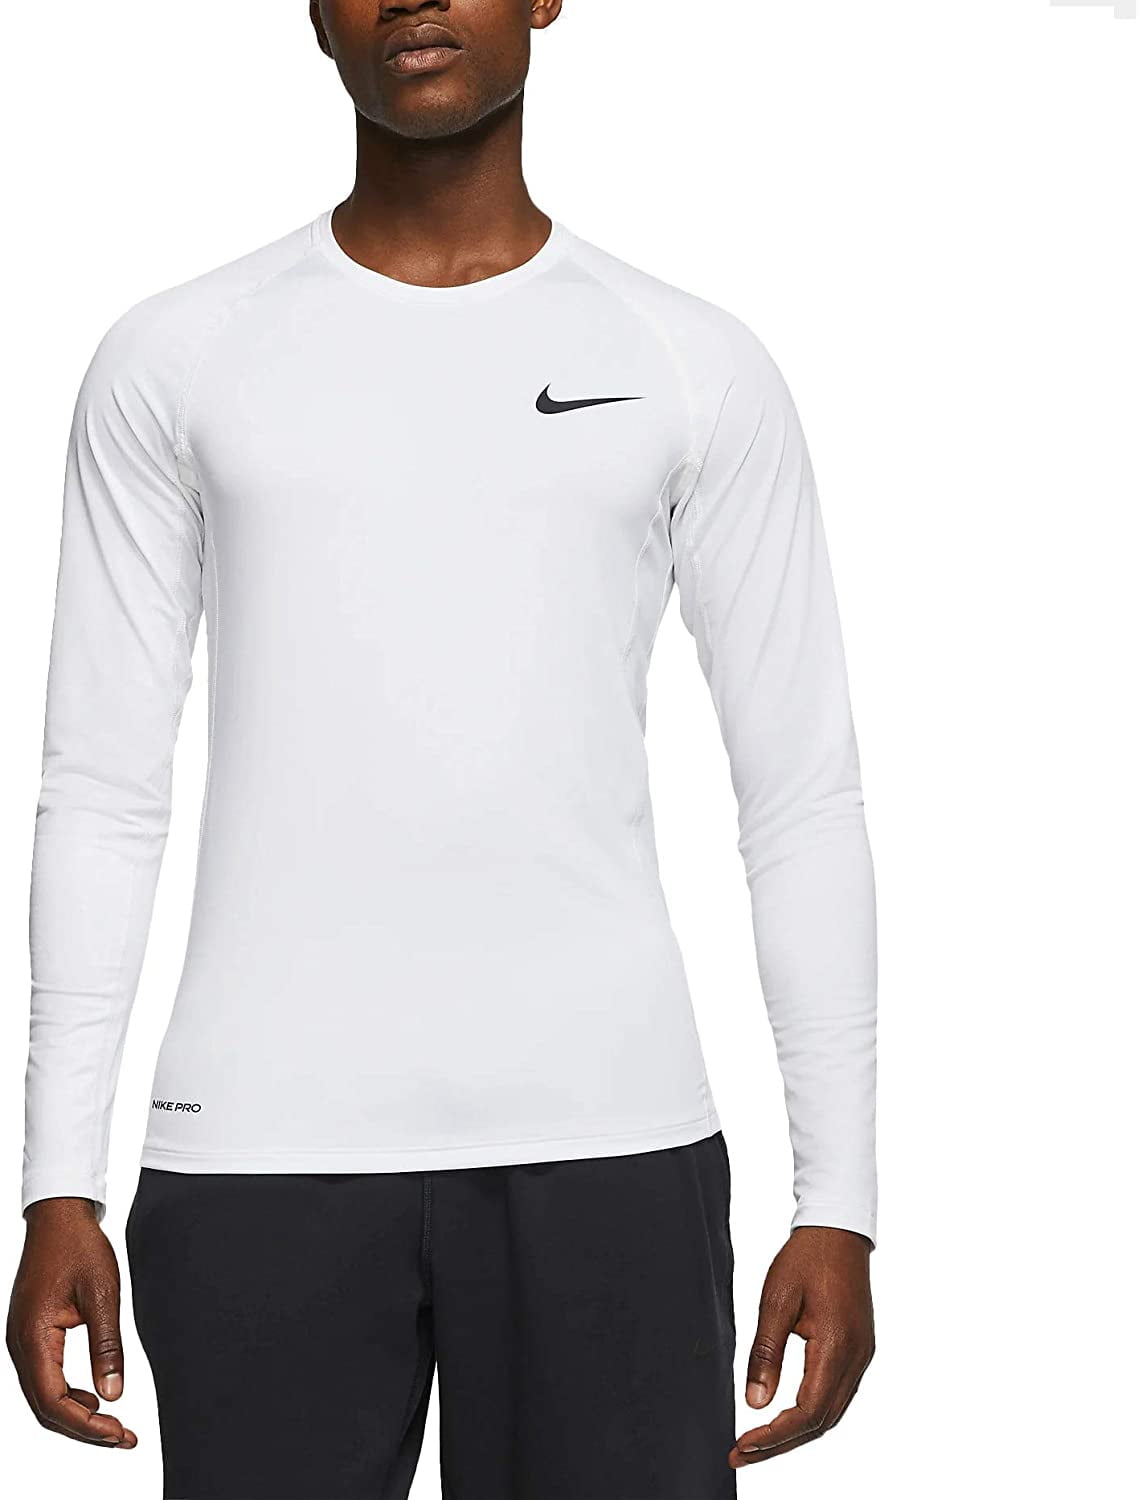 Pro Fitted Top 3X-Large White/Black Walmart.com